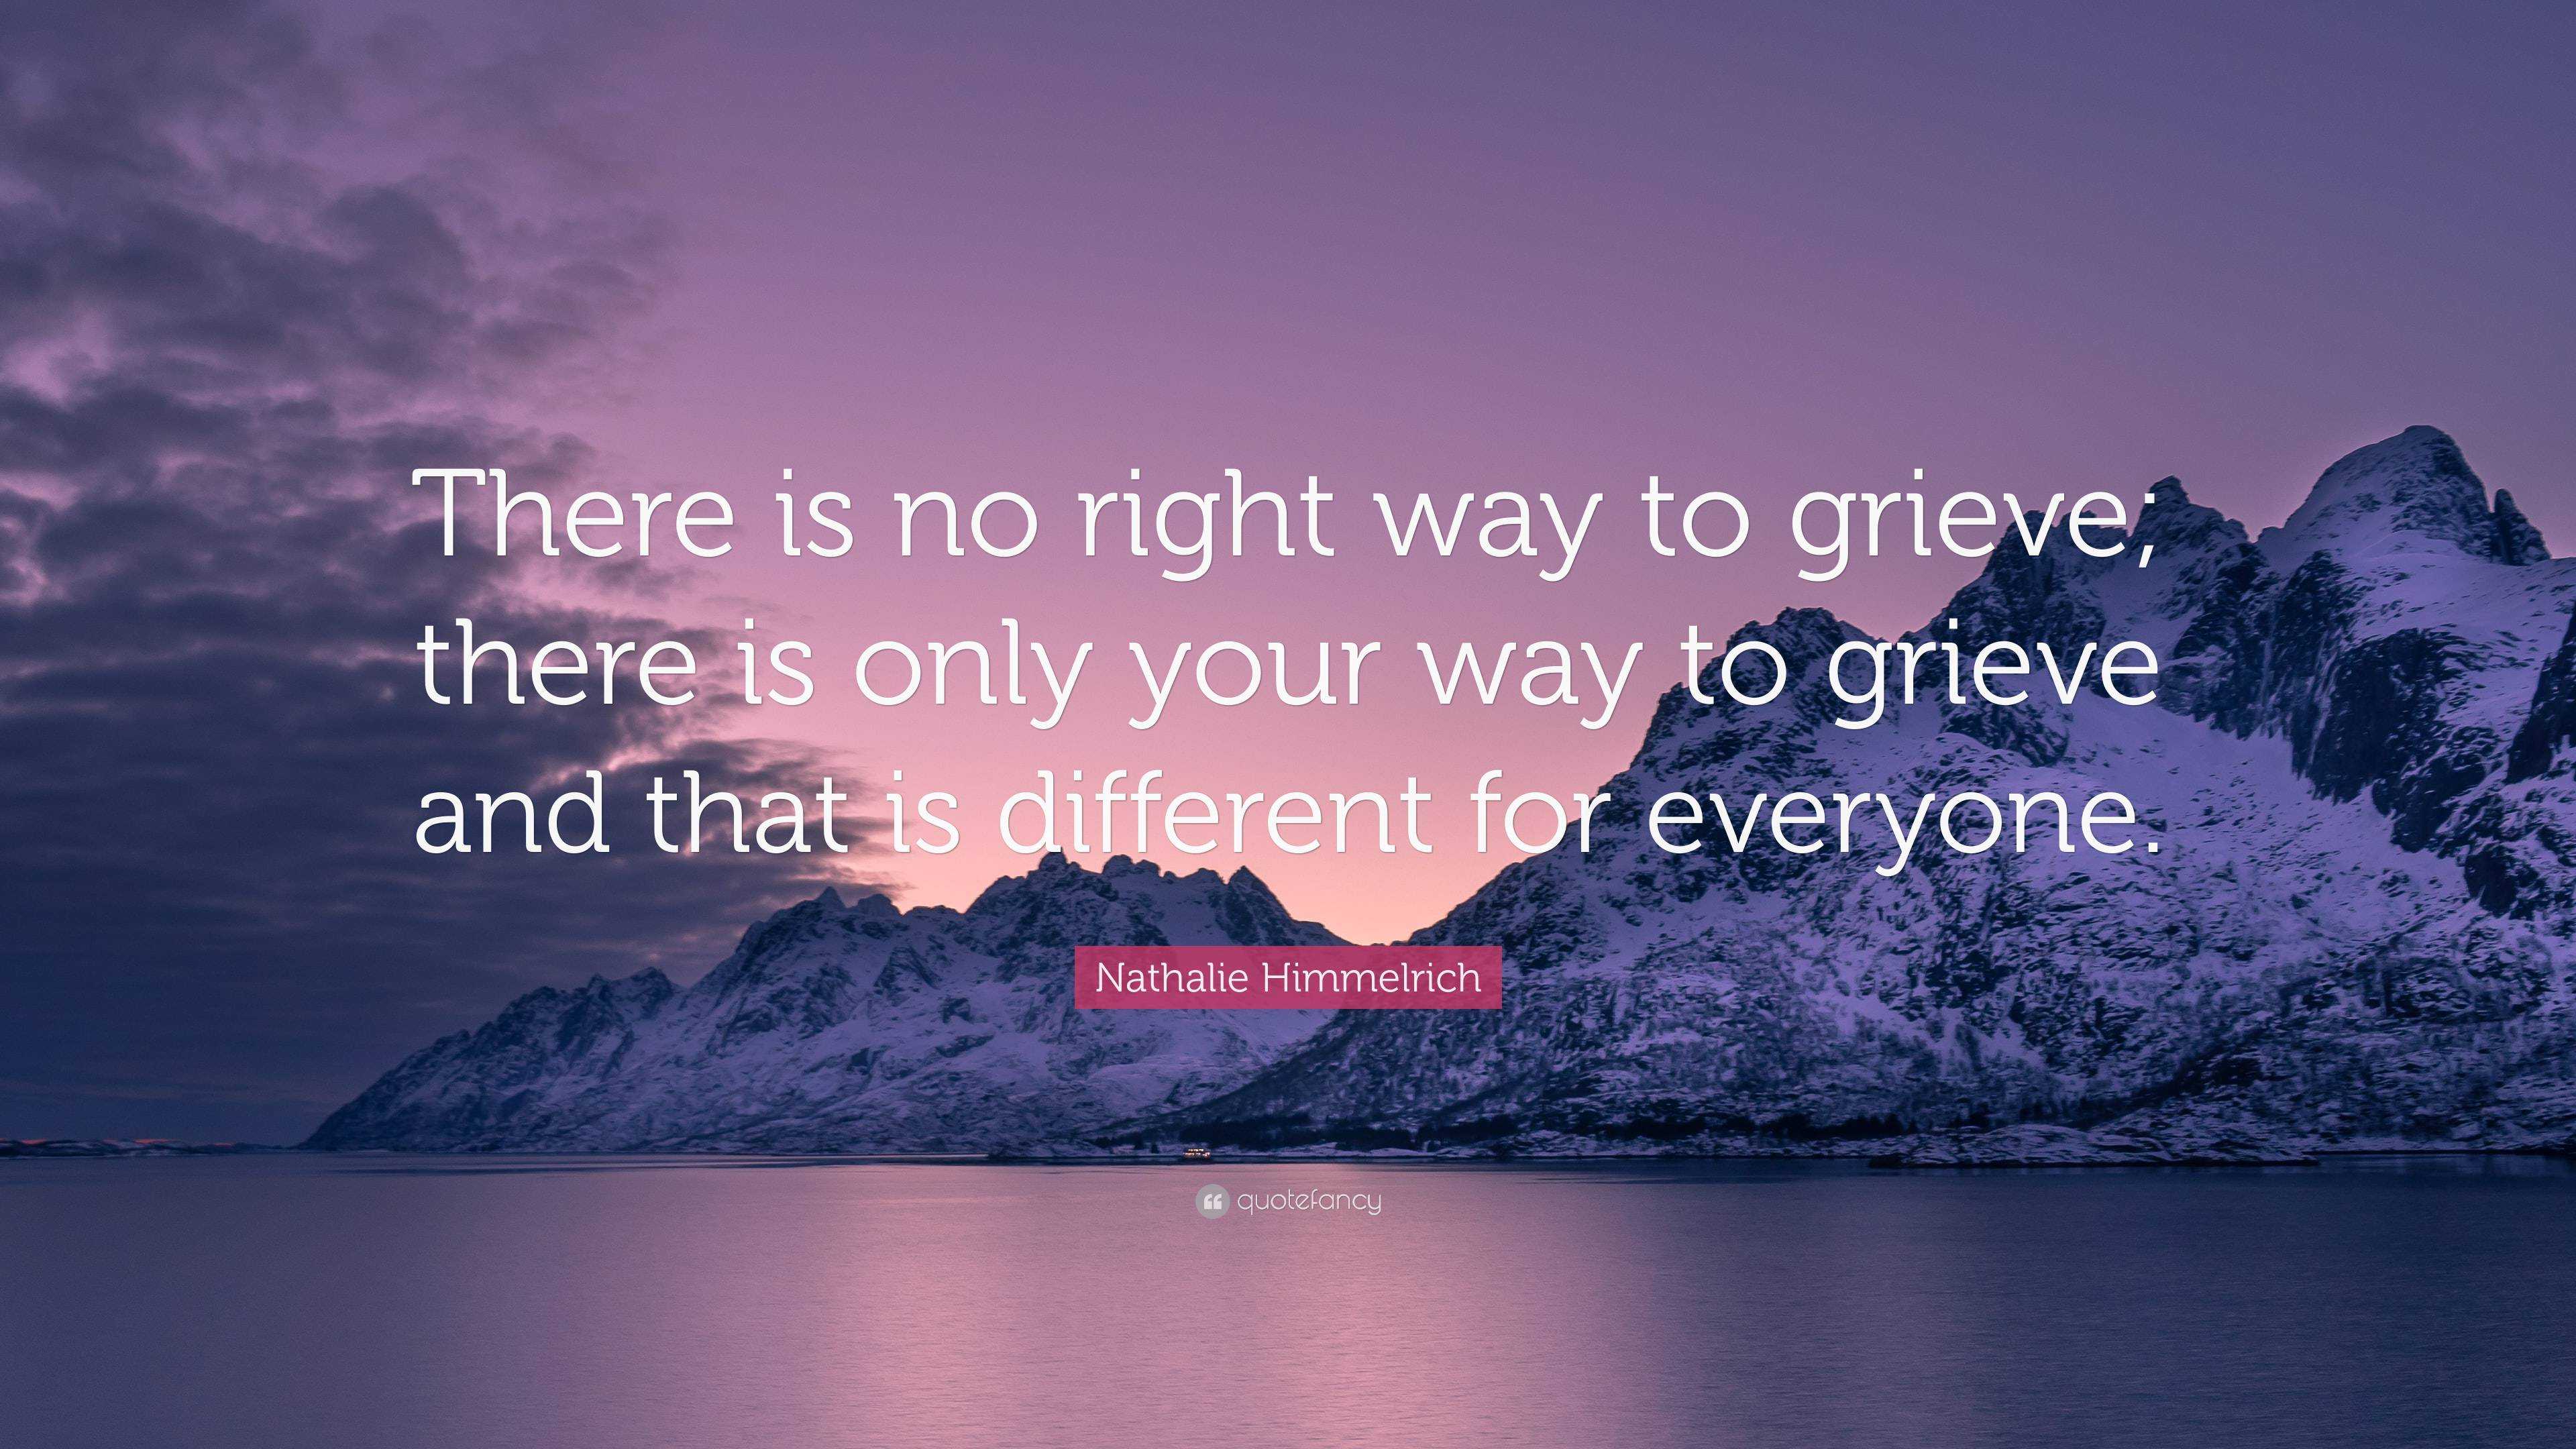 Nathalie Himmelrich Quote “there Is No Right Way To Grieve There Is Only Your Way To Grieve